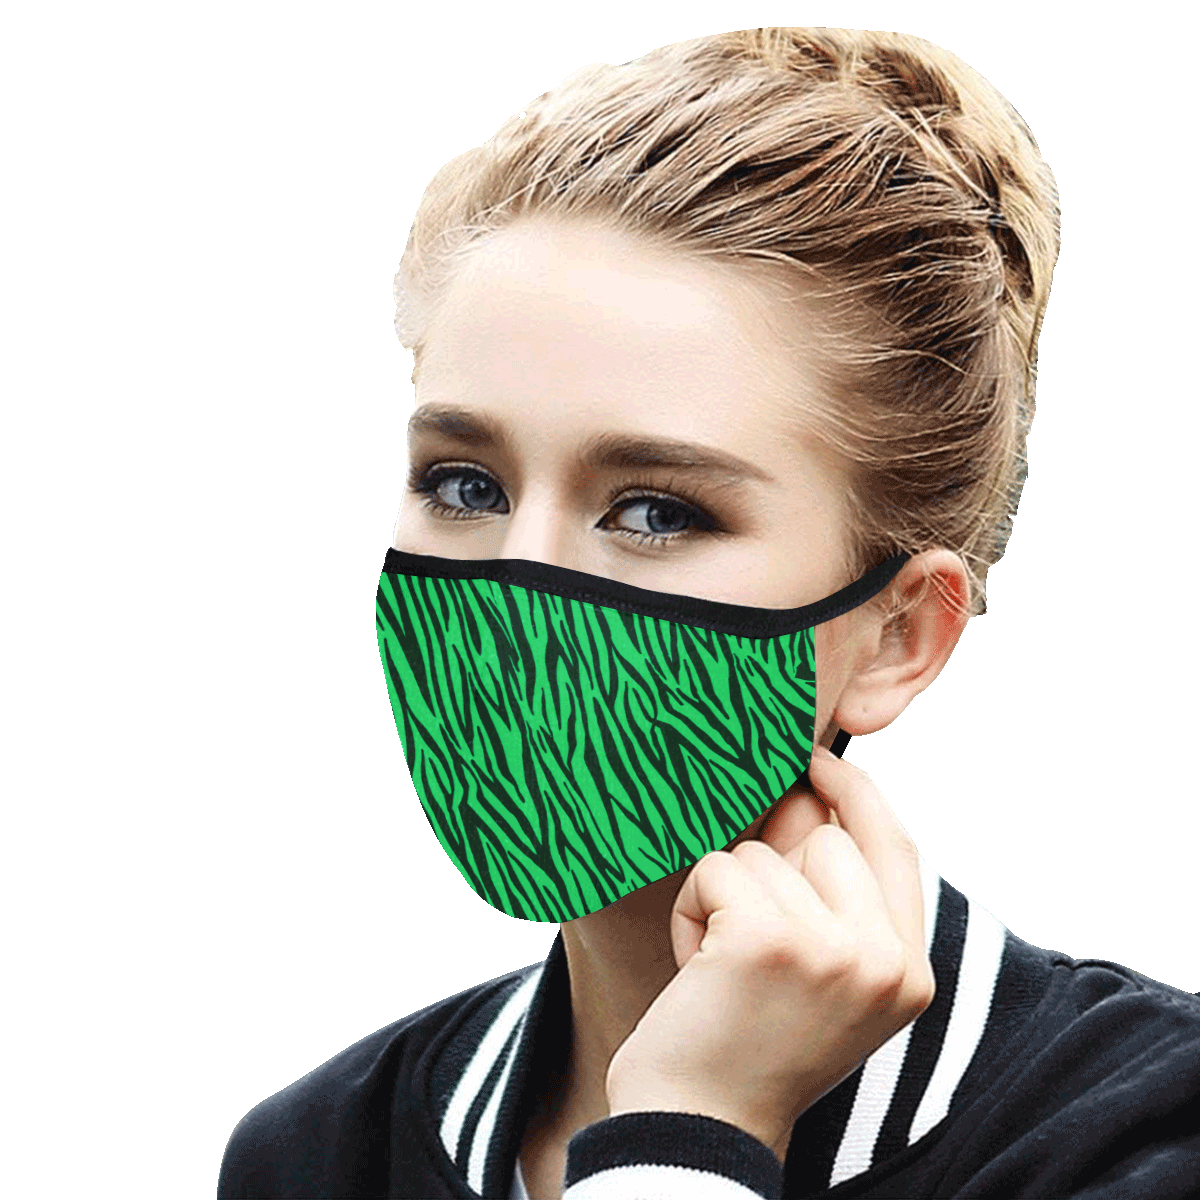 Green Zebra Stripes Face Mask Mouth Mask in One Piece (Model M02)